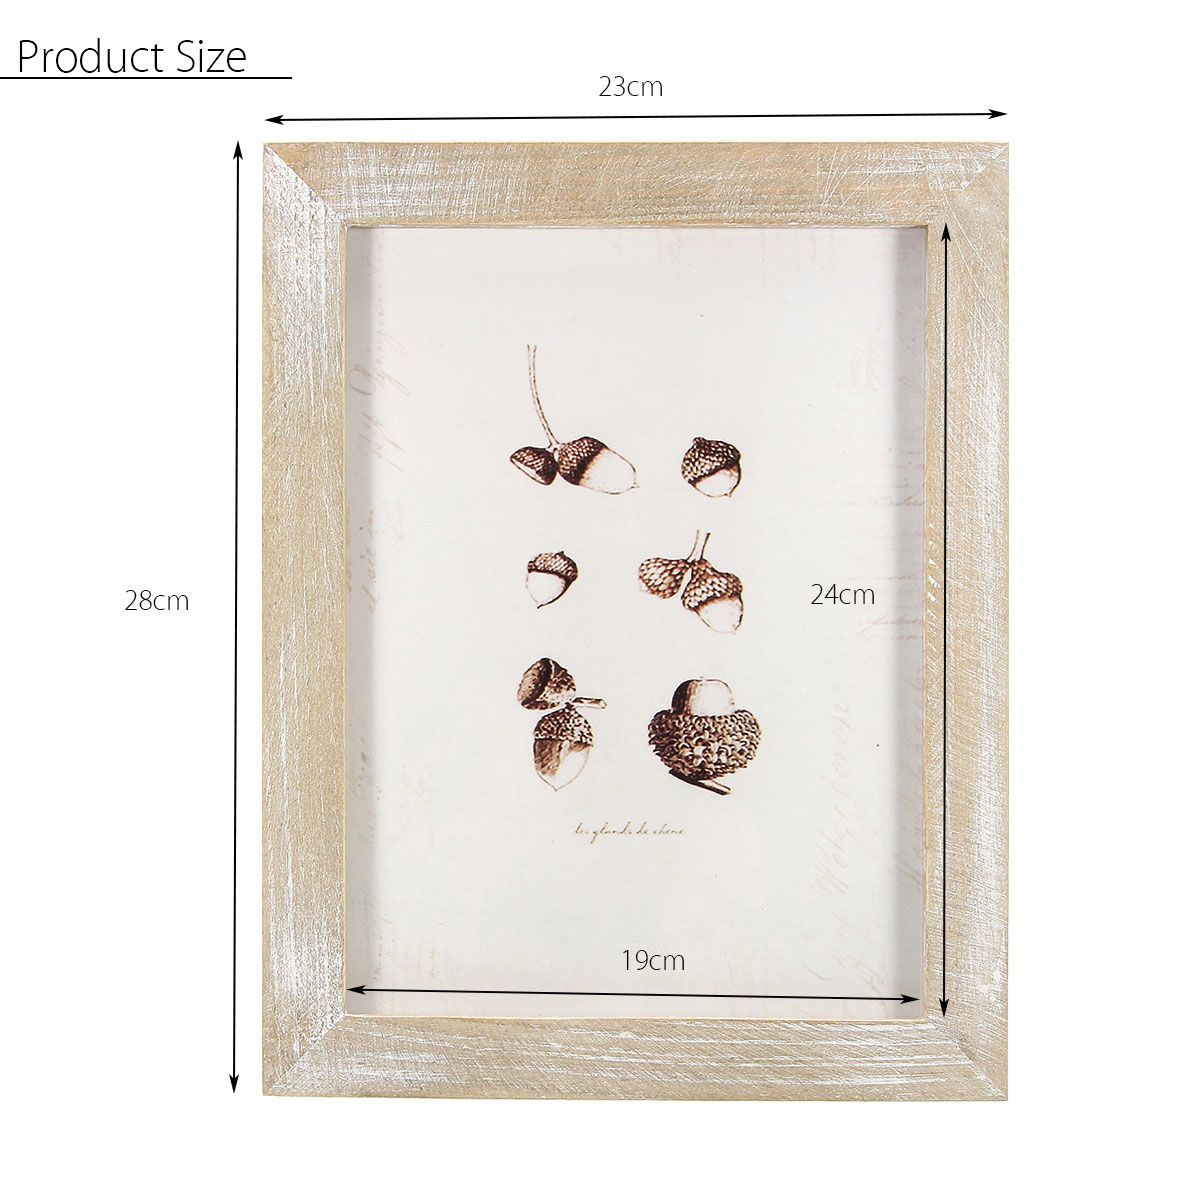 28x23cm24x19cm-Vintage-Solid-Wood-Photo-Picture-Frame-Wall-Hanging-Shabby-Chic-Room-Decoration-1218642